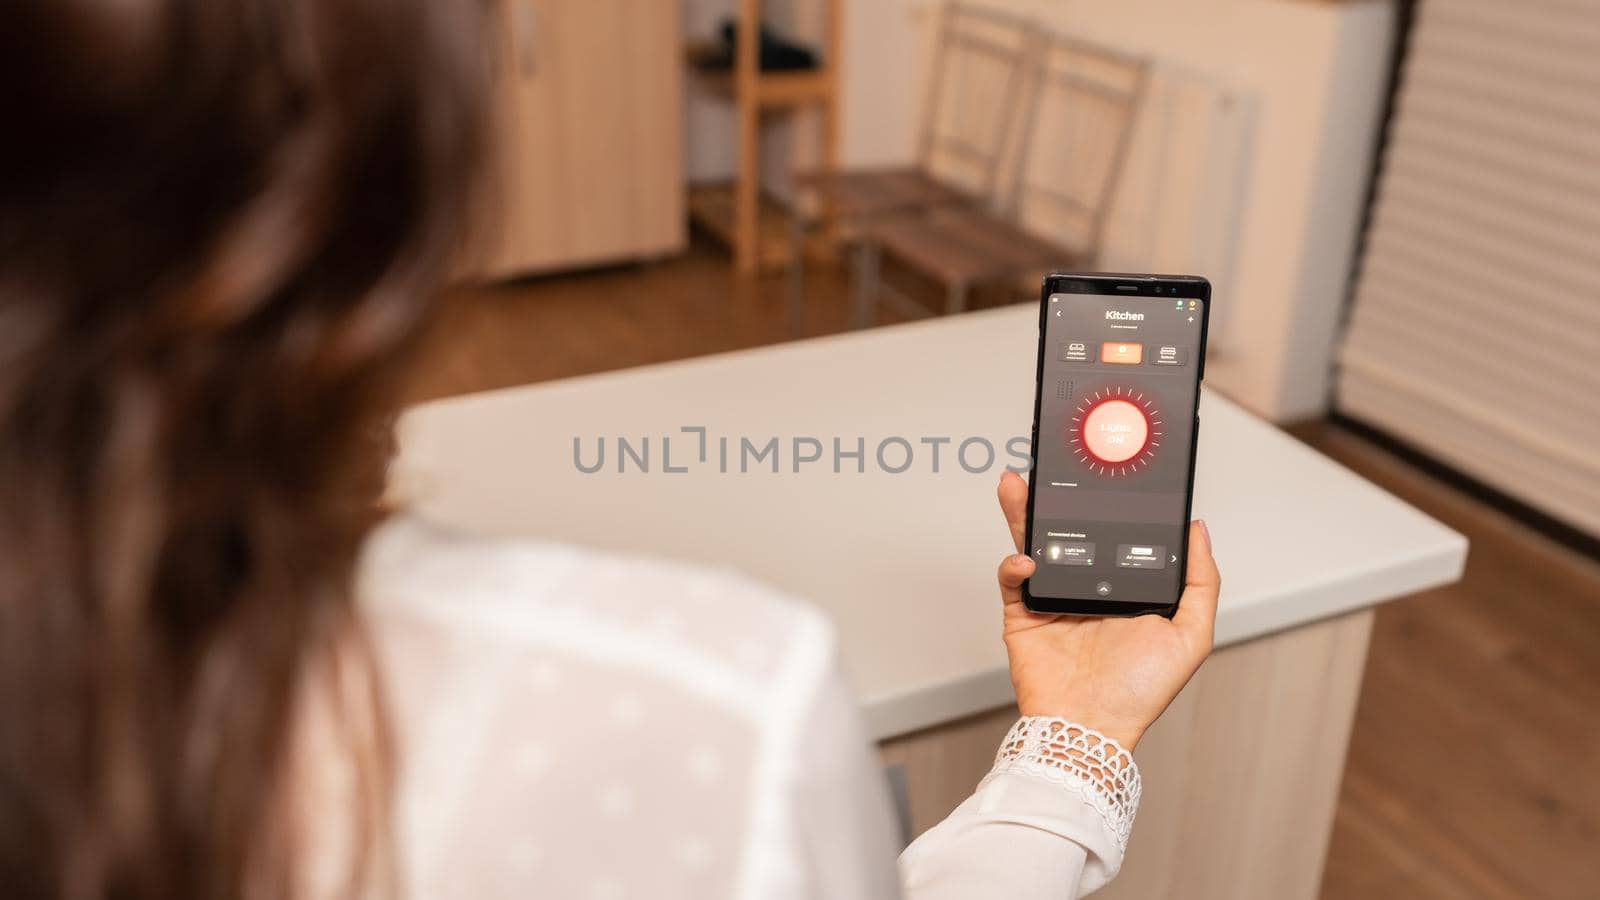 Woman in home kitchen using phone app to remotely control lighting system. Person in apartment holding telephone with touchscreen and app for lights.